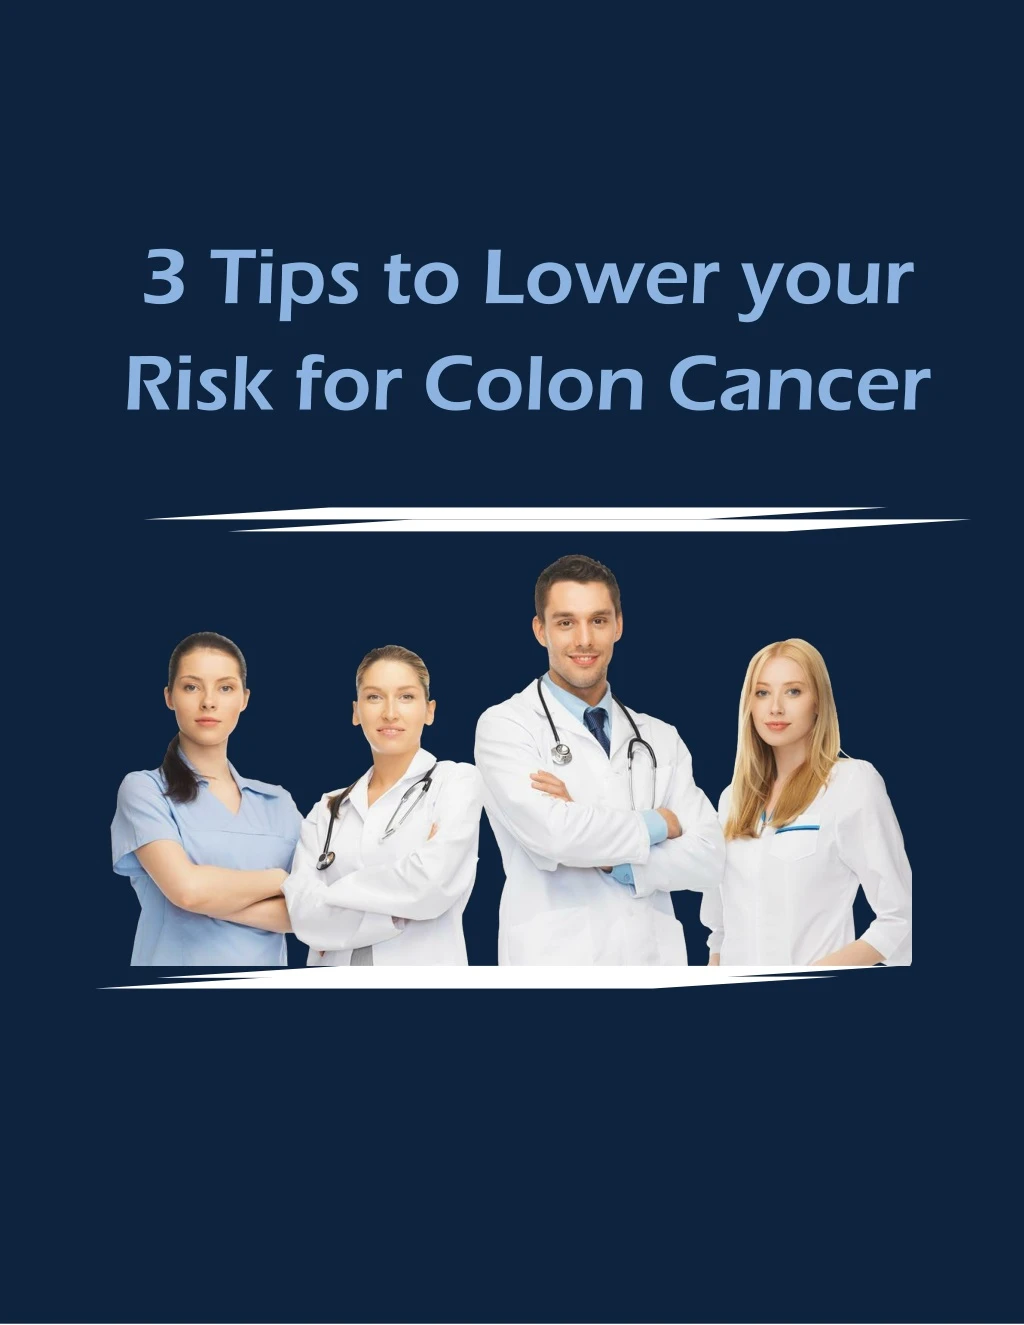 3 tips to lower your risk for colon cancer